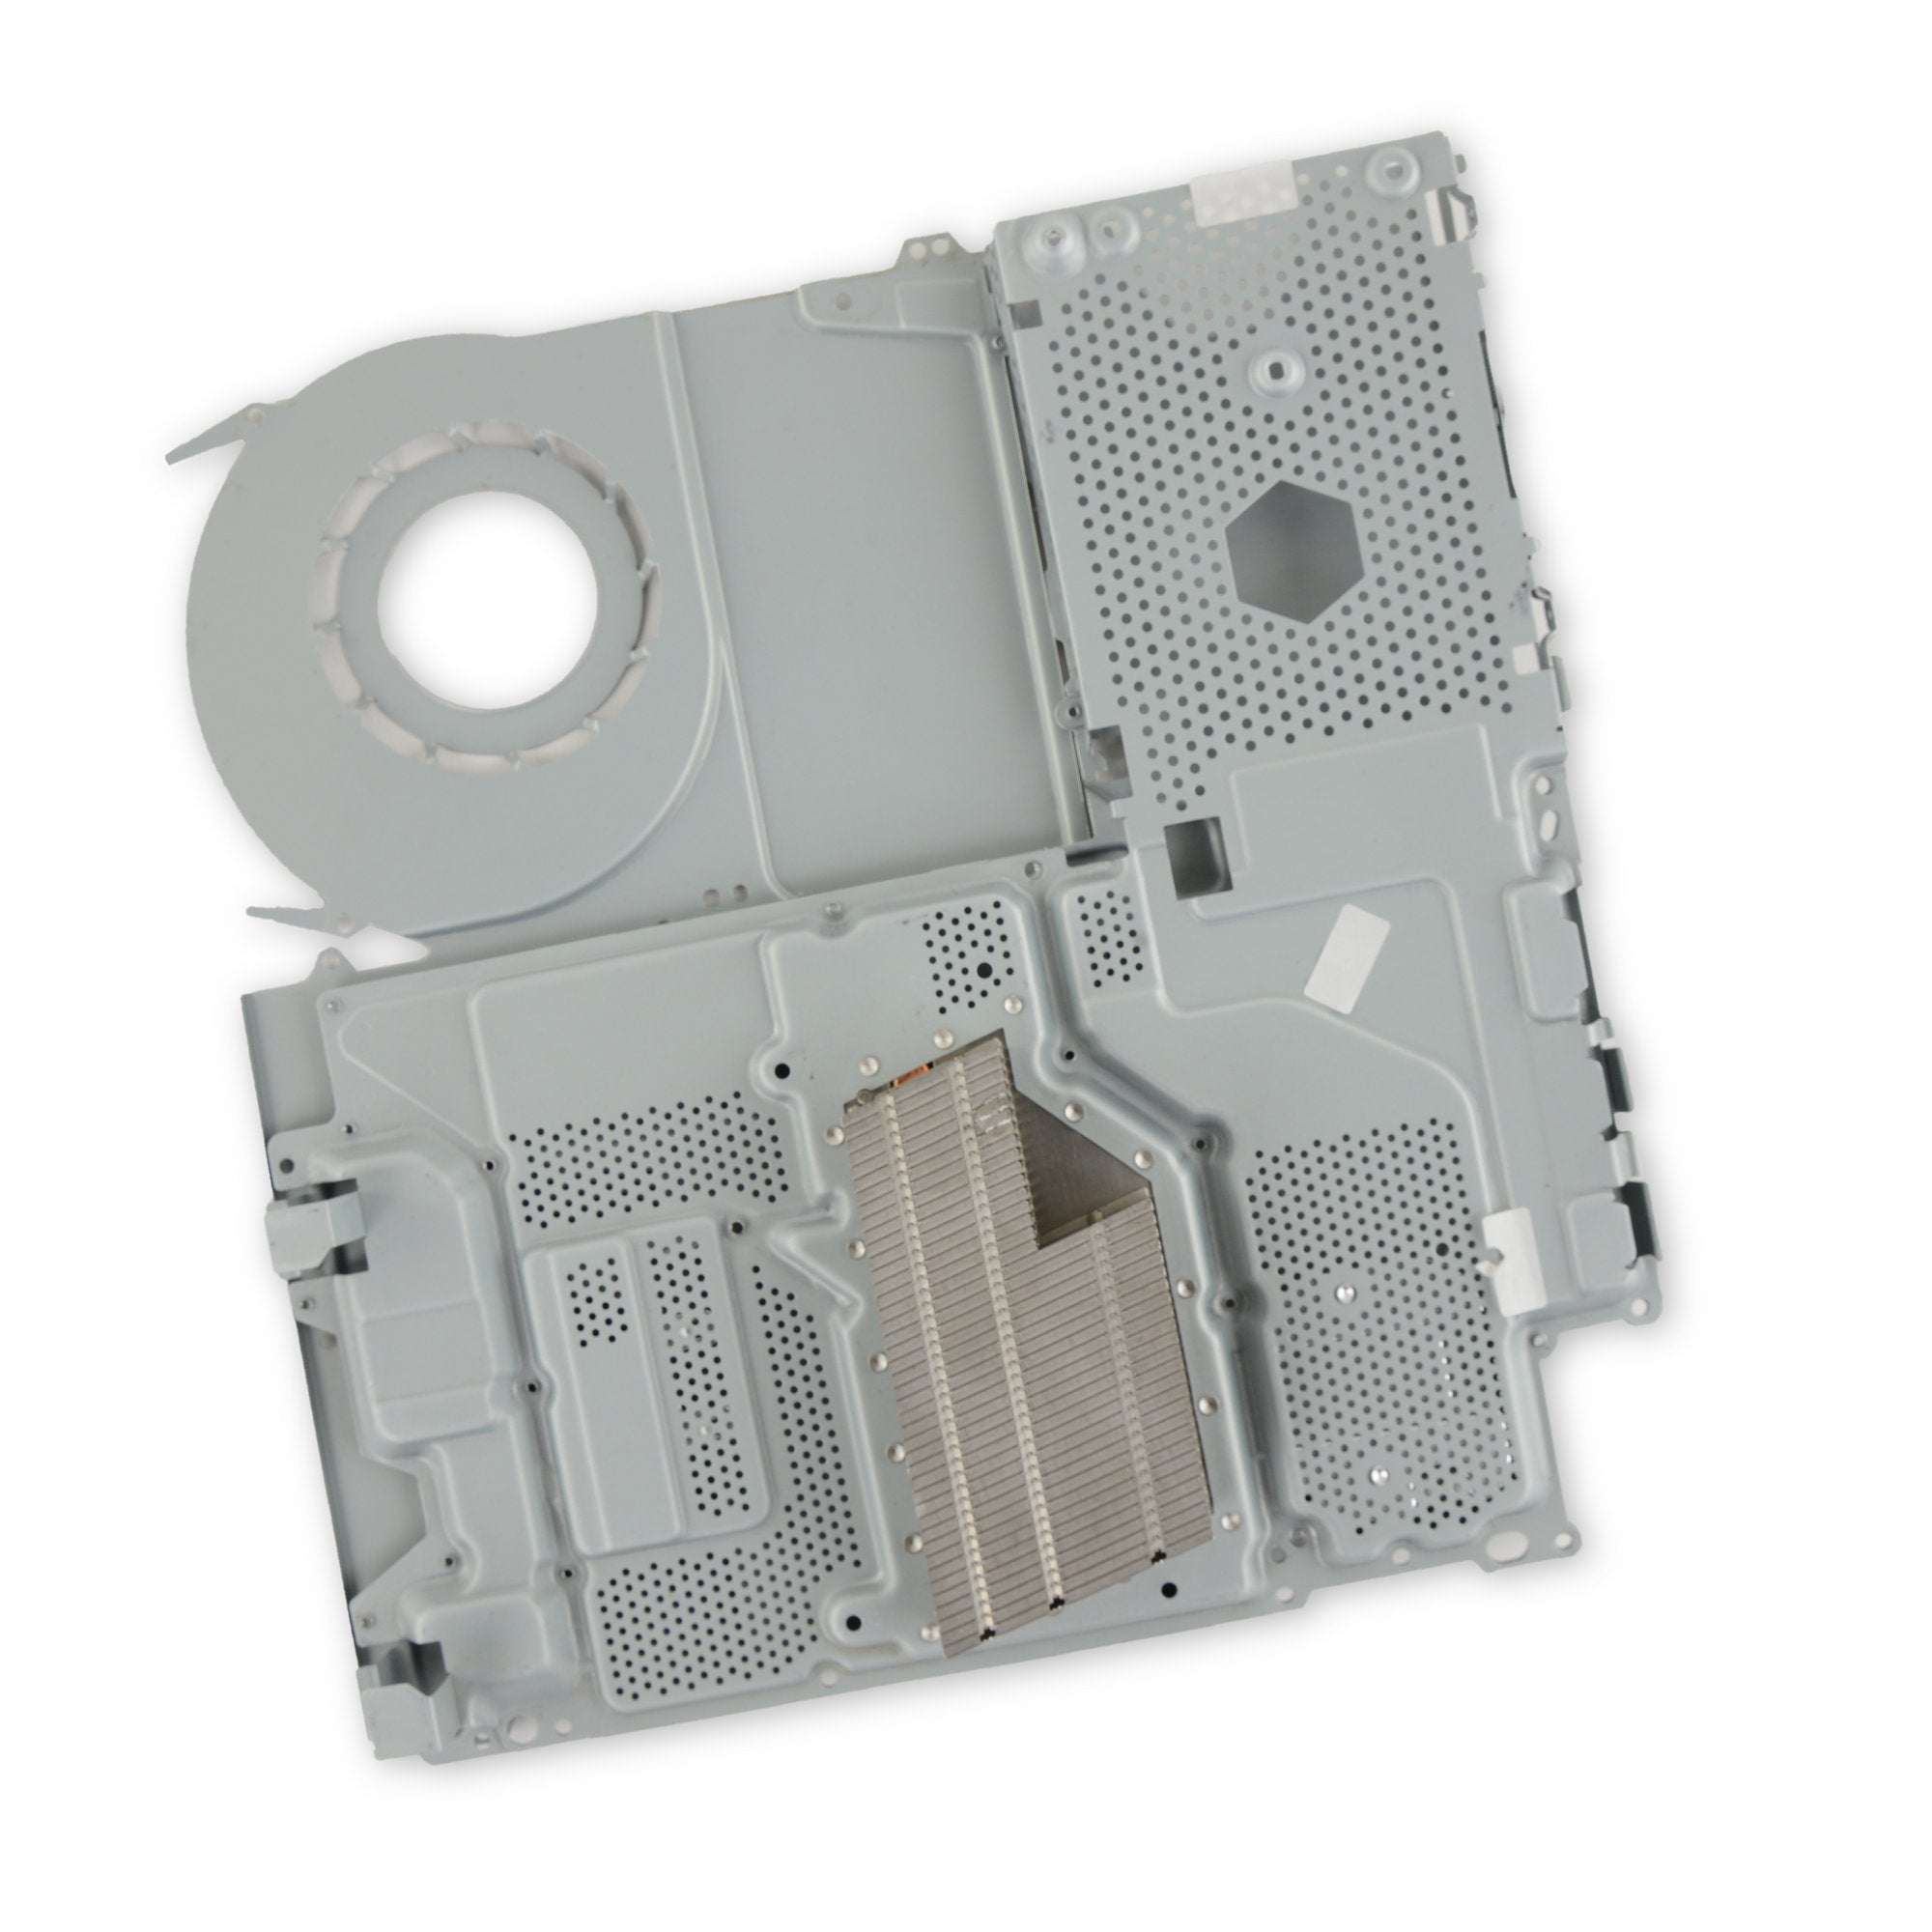 PlayStation 4 Slim Heat Sink and Chassis Plates